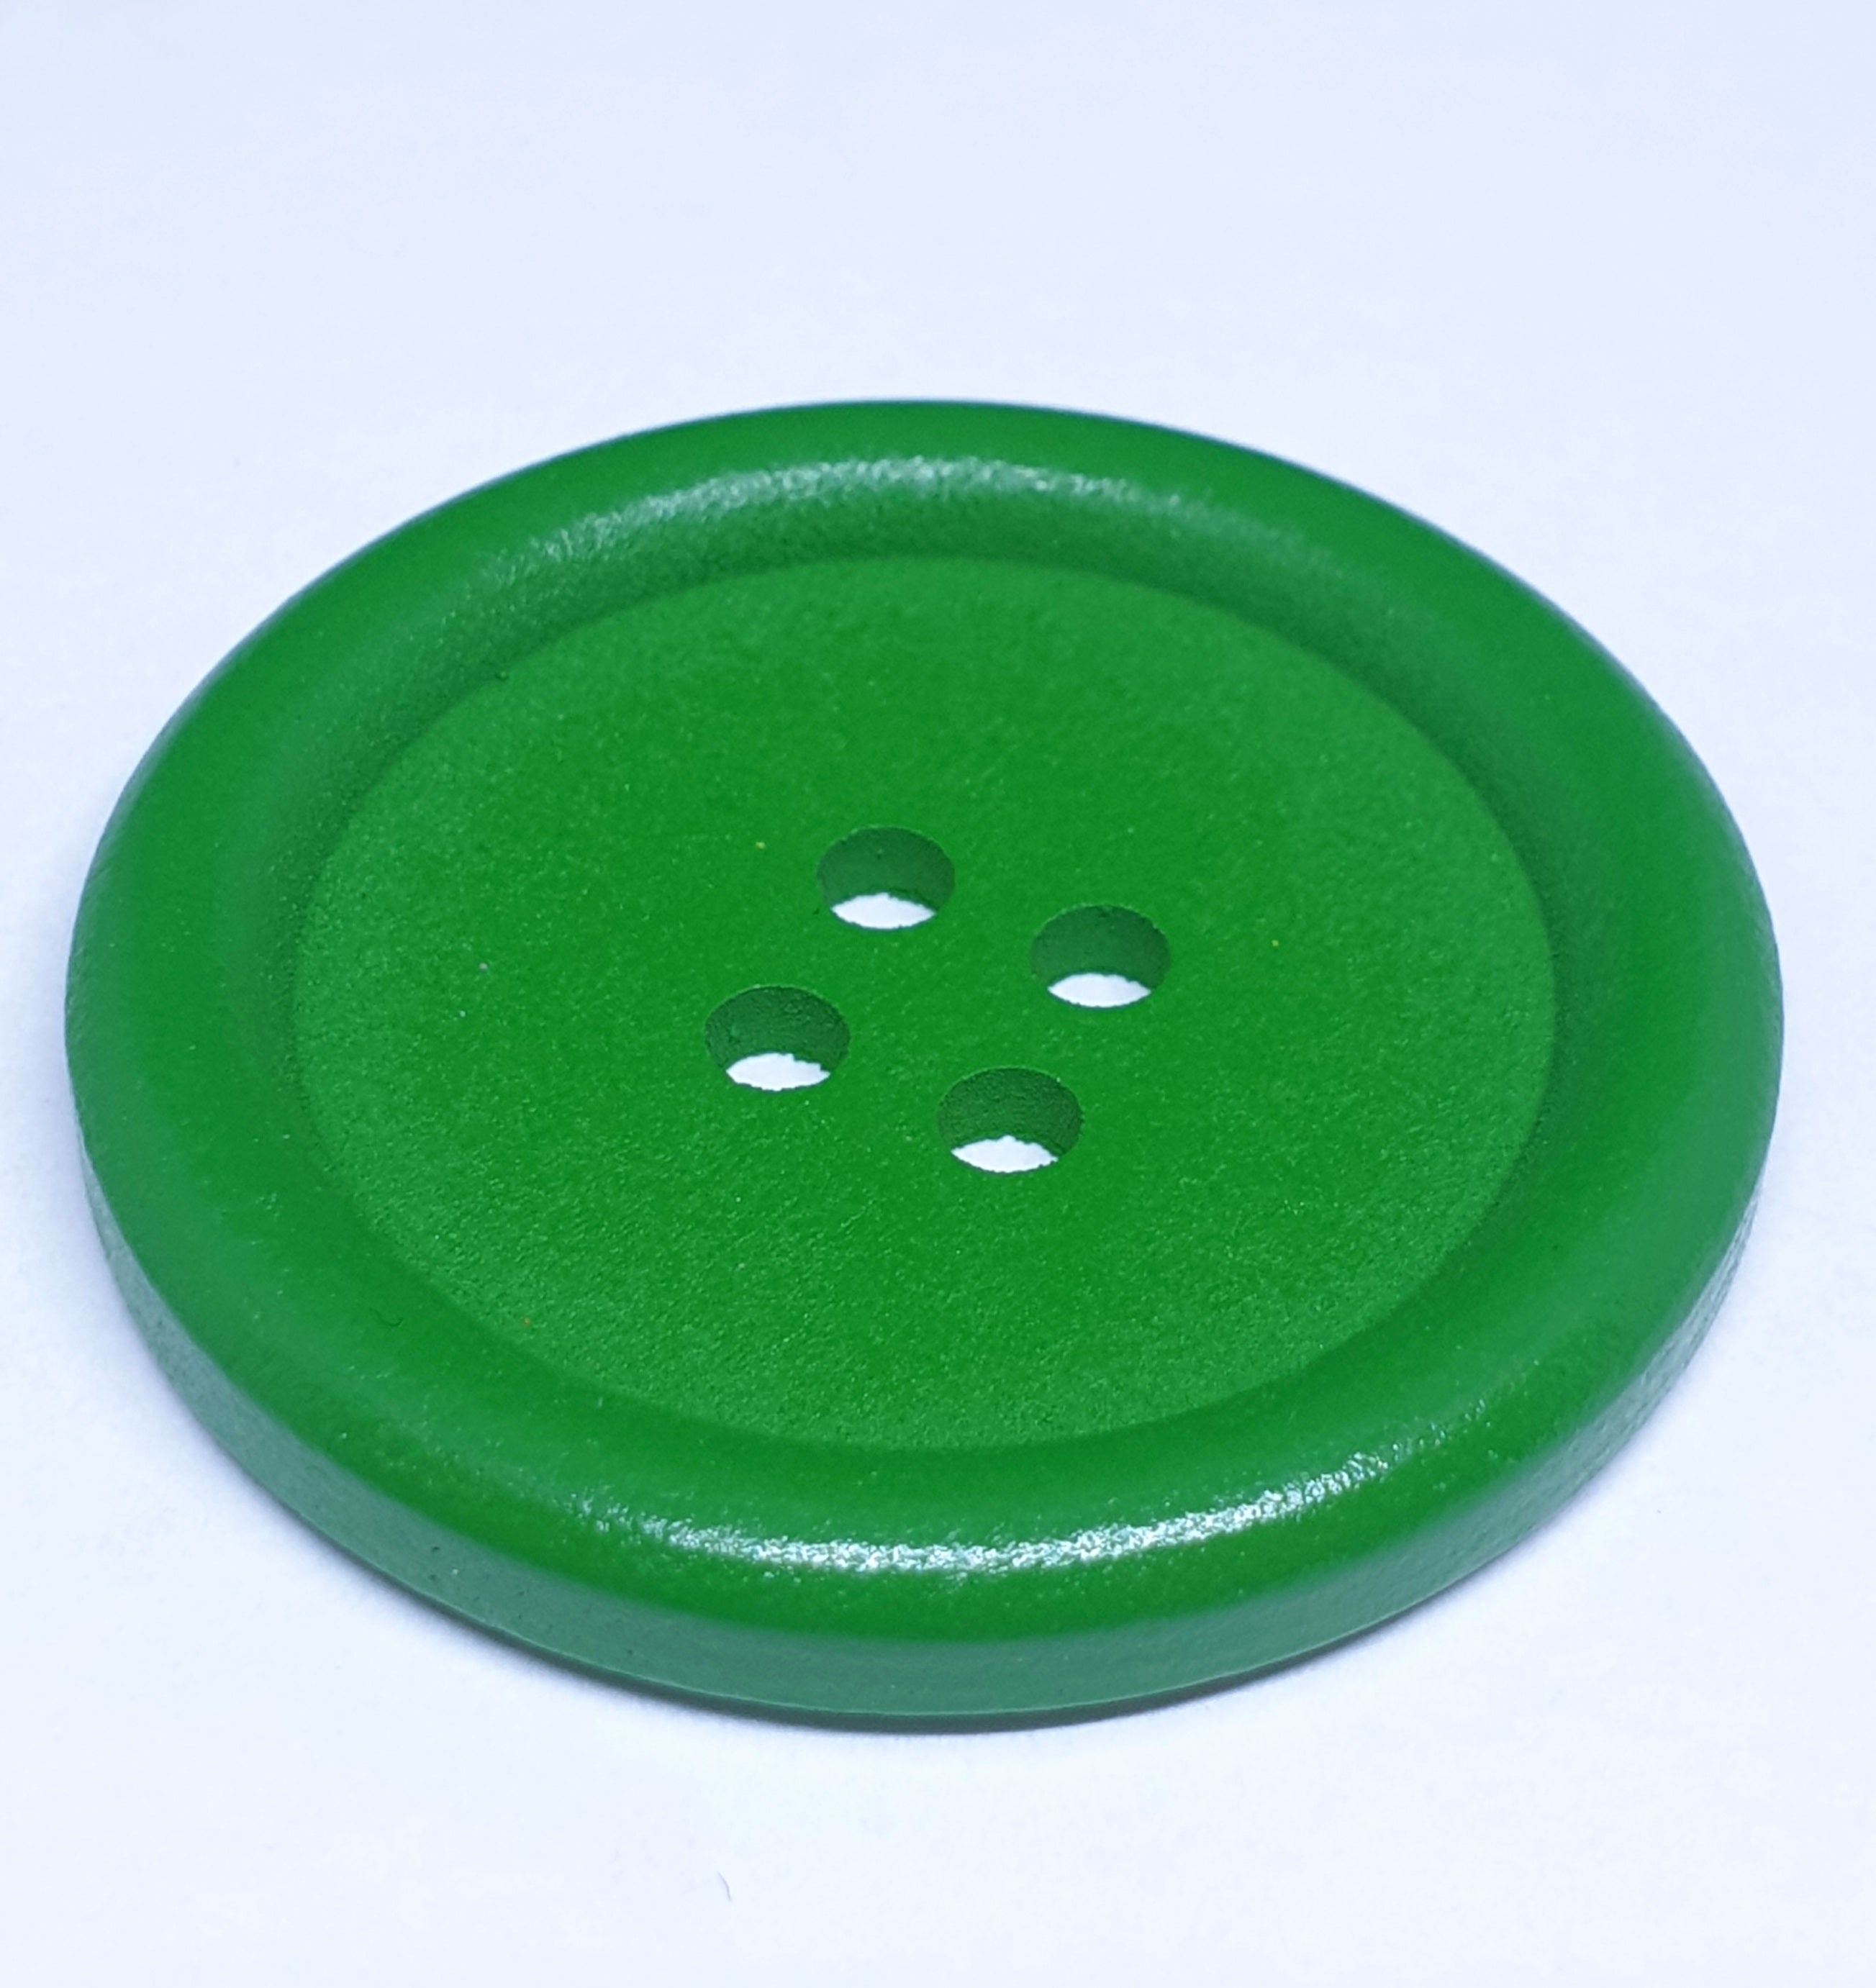 MajorCrafts 8pcs 40mm Green Round 4 Holes Large Wooden Sewing Buttons